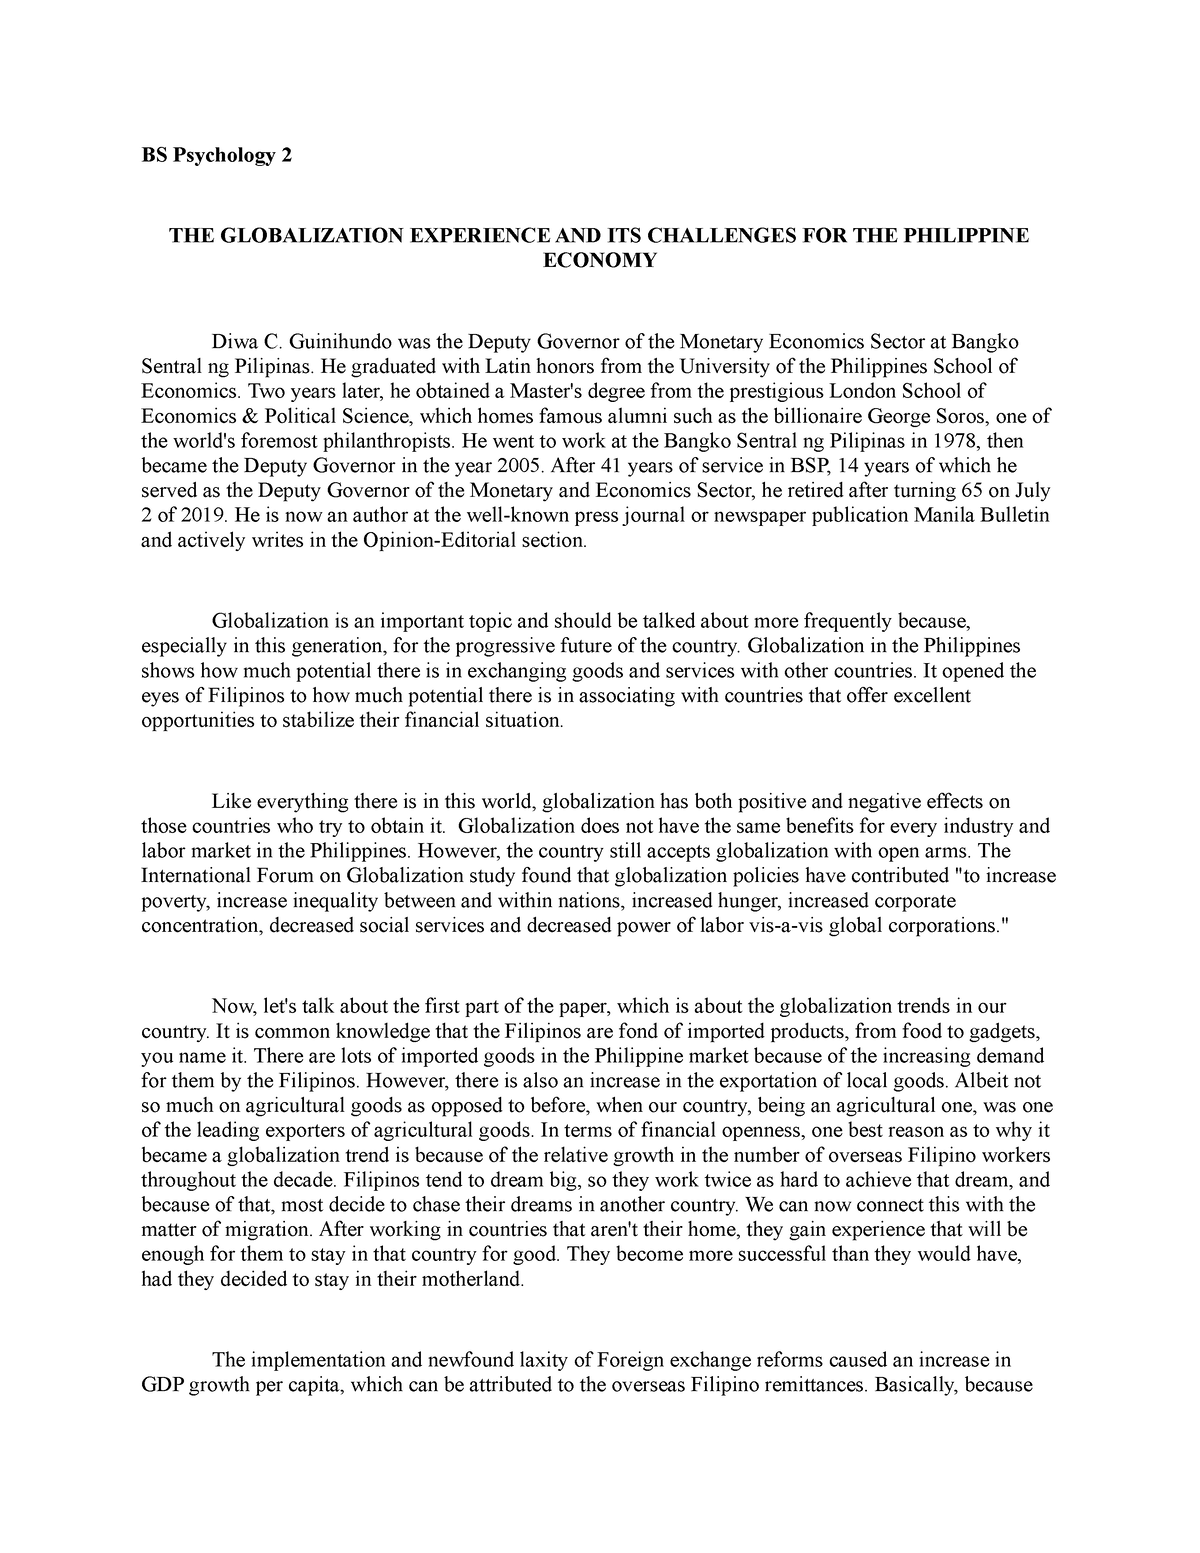 research paper about globalization in the philippines